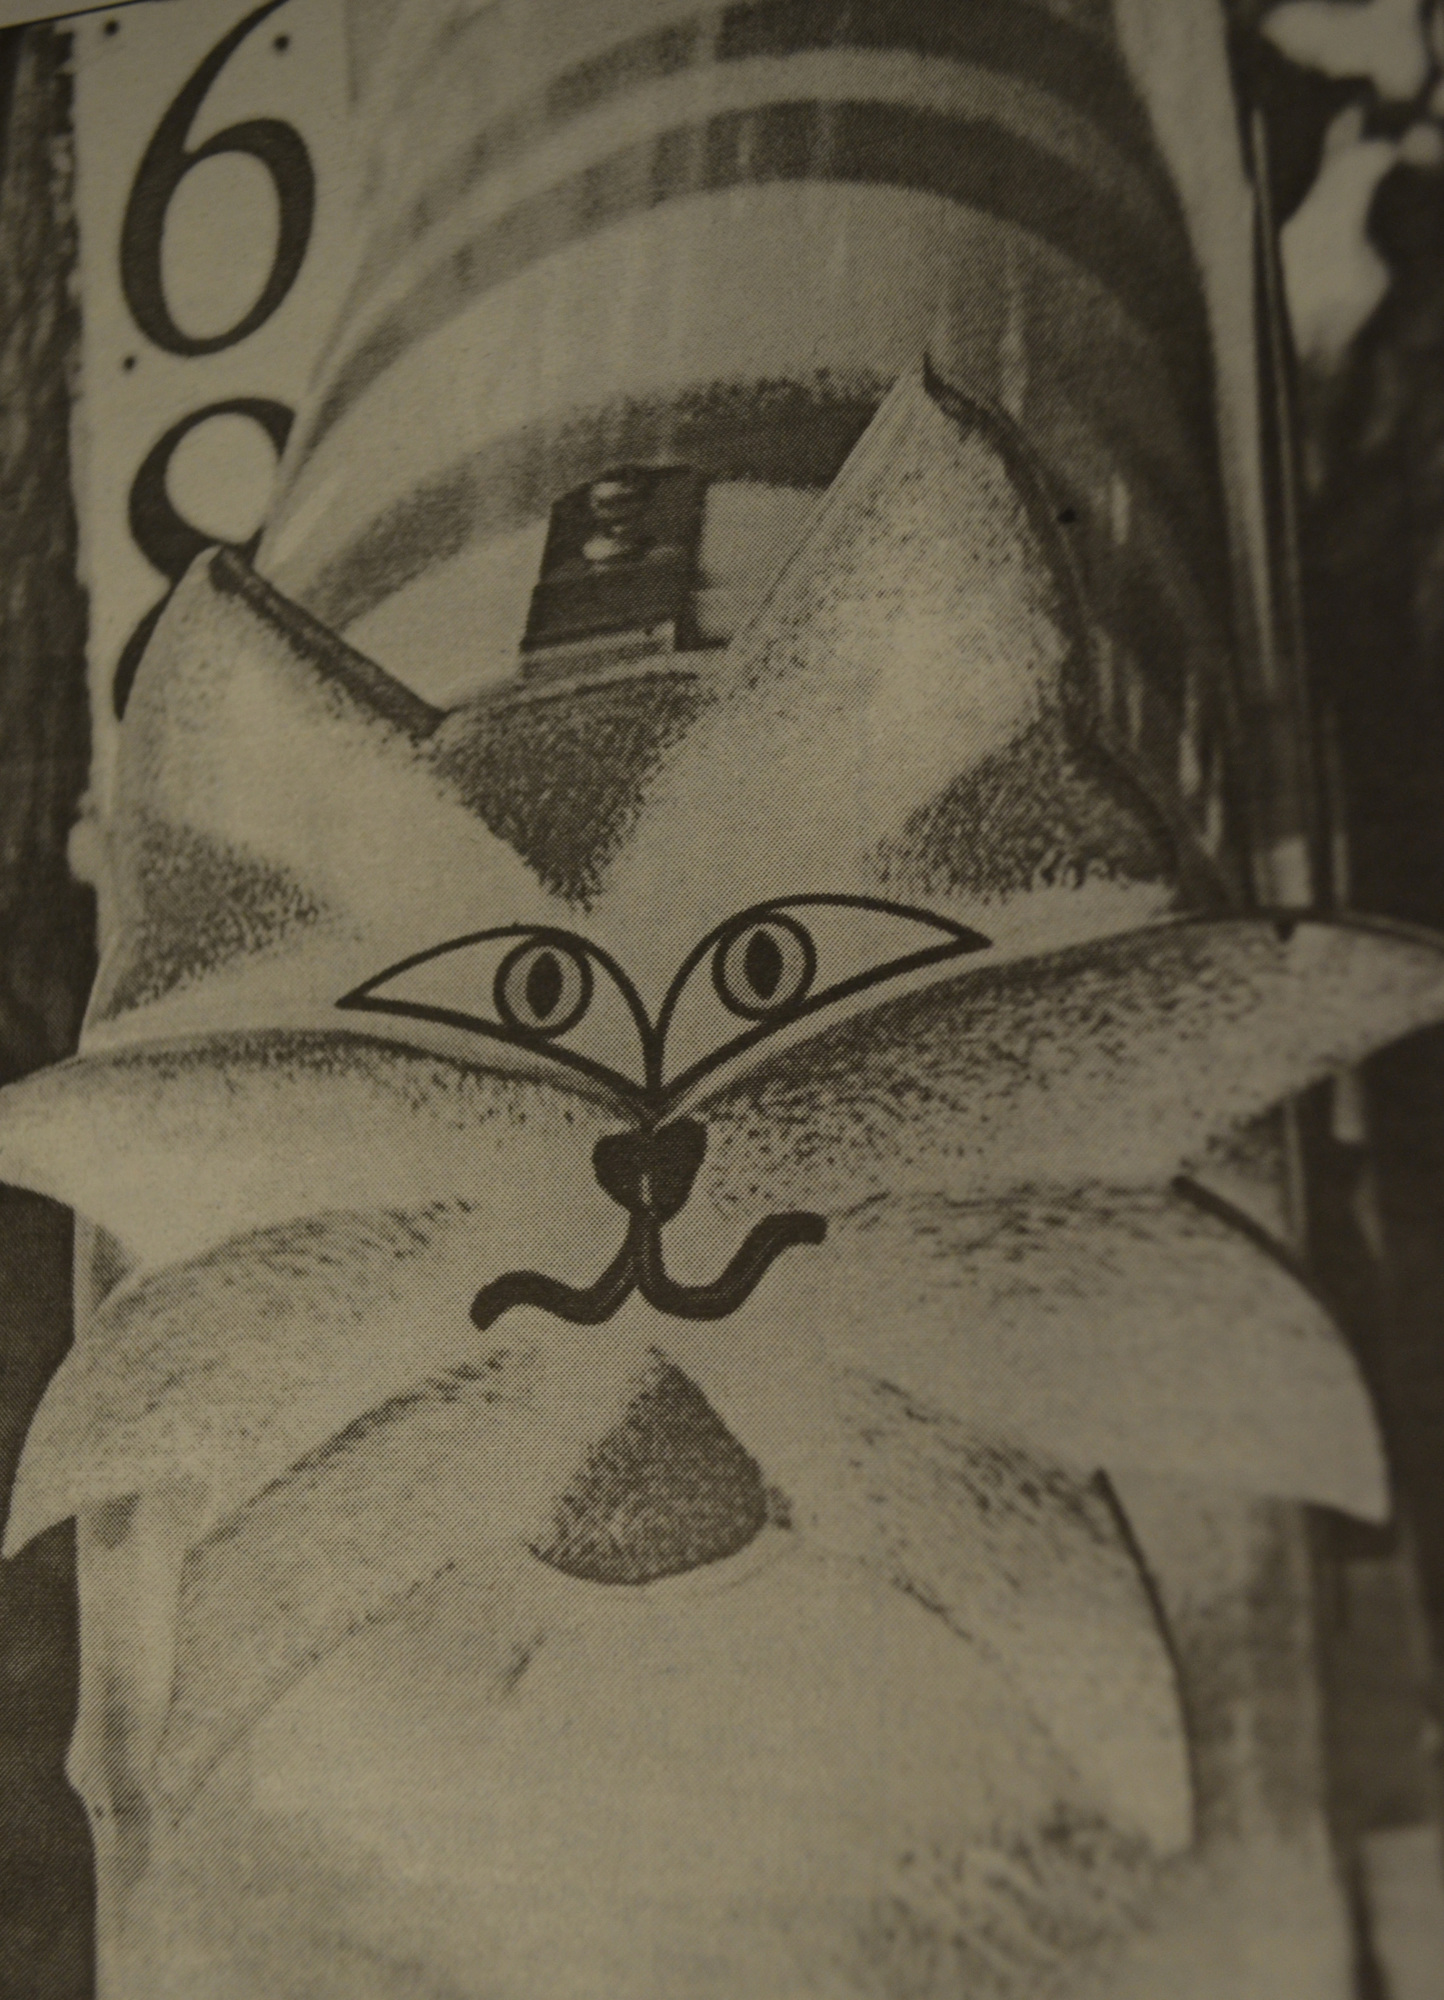 A cat mailbox featured in the August 17, 1995 issue with a photo spread of quirky mailboxes.